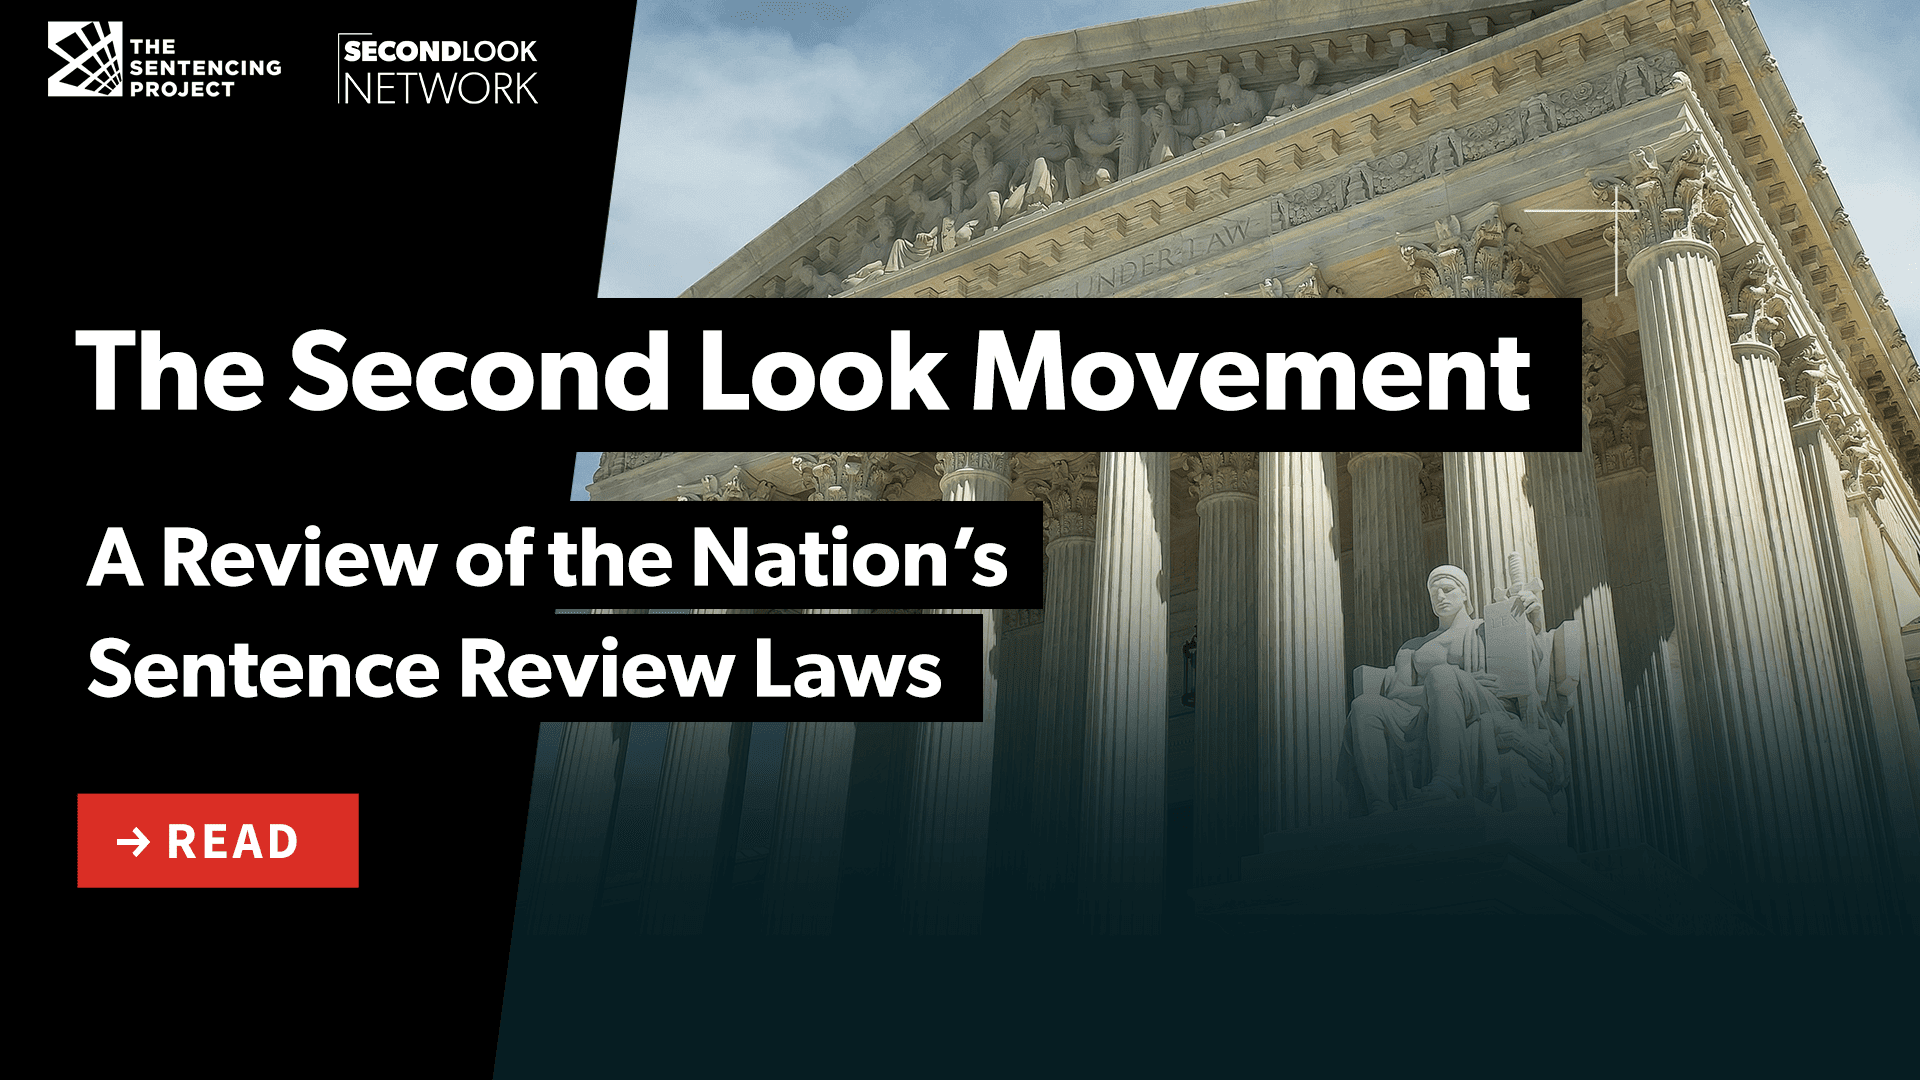 The Second Look Movement: A Review of the Nation’s Sentence Review Laws